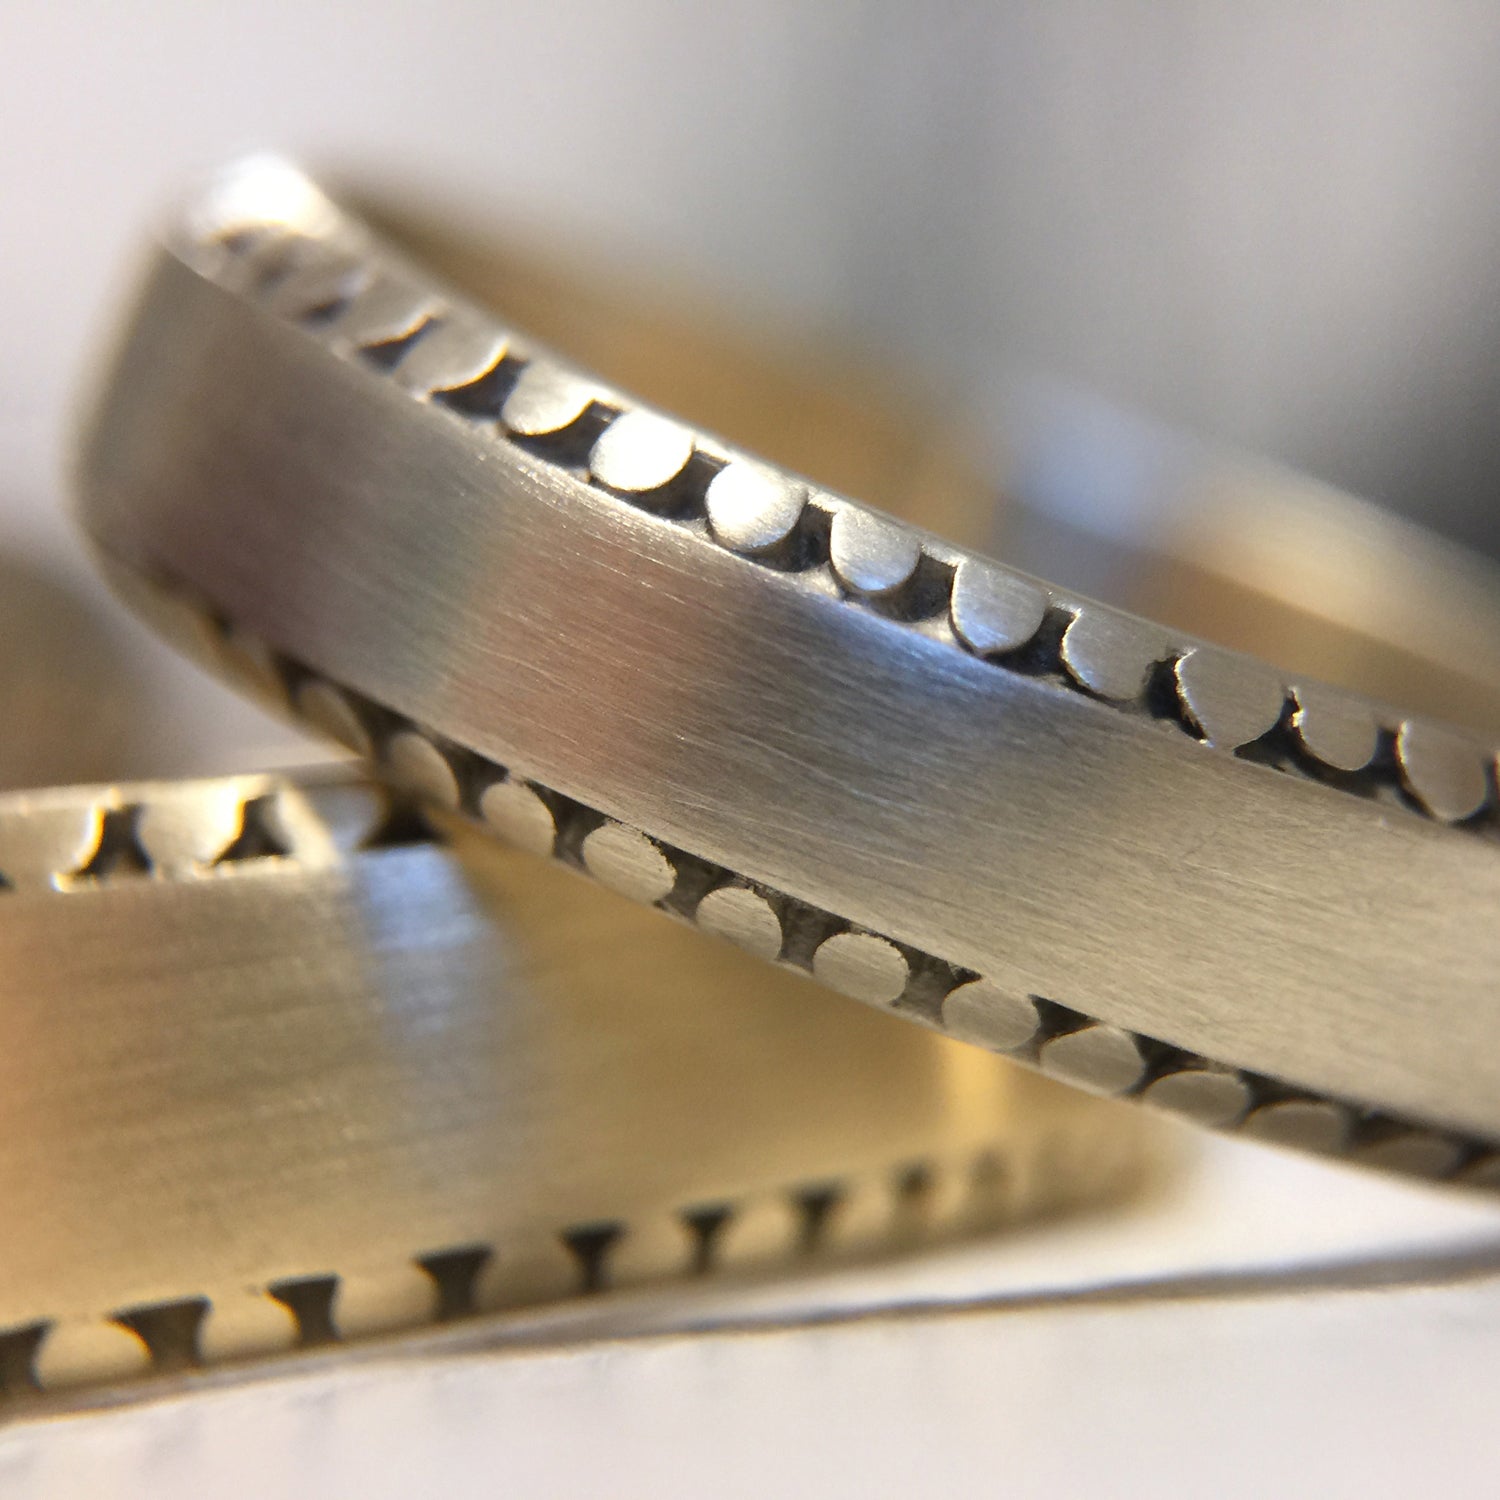 Plain Costa Bands 4 mm in 18K white gold and 6.1 mm in 18K yellow gold, detail